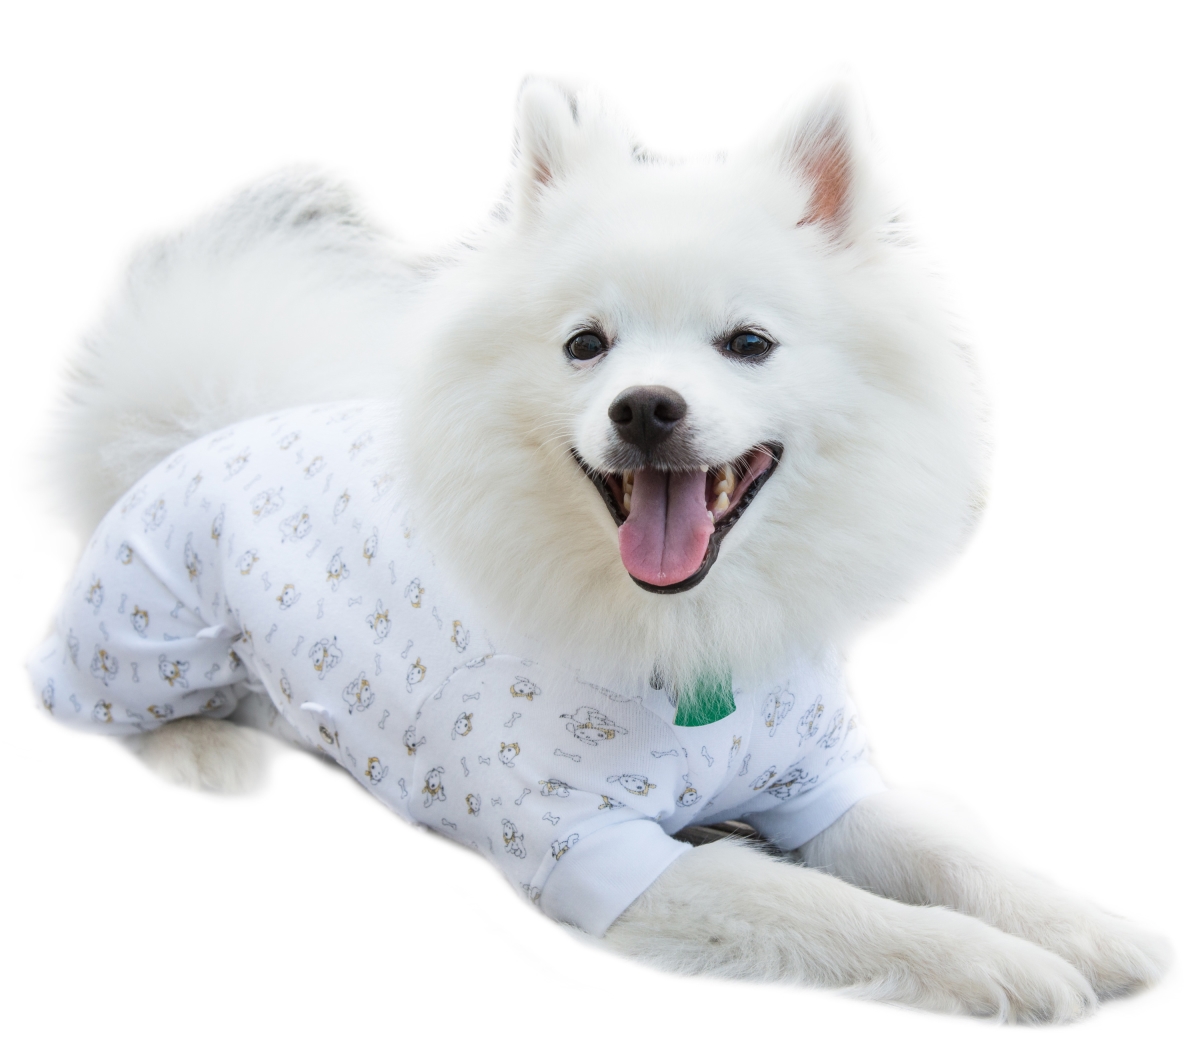 Xl Adj Fit Pullover Ls Puppy Pr Adjustable Fit Puppy Print Pullover With Long Sleeve For Pets - Extra Large